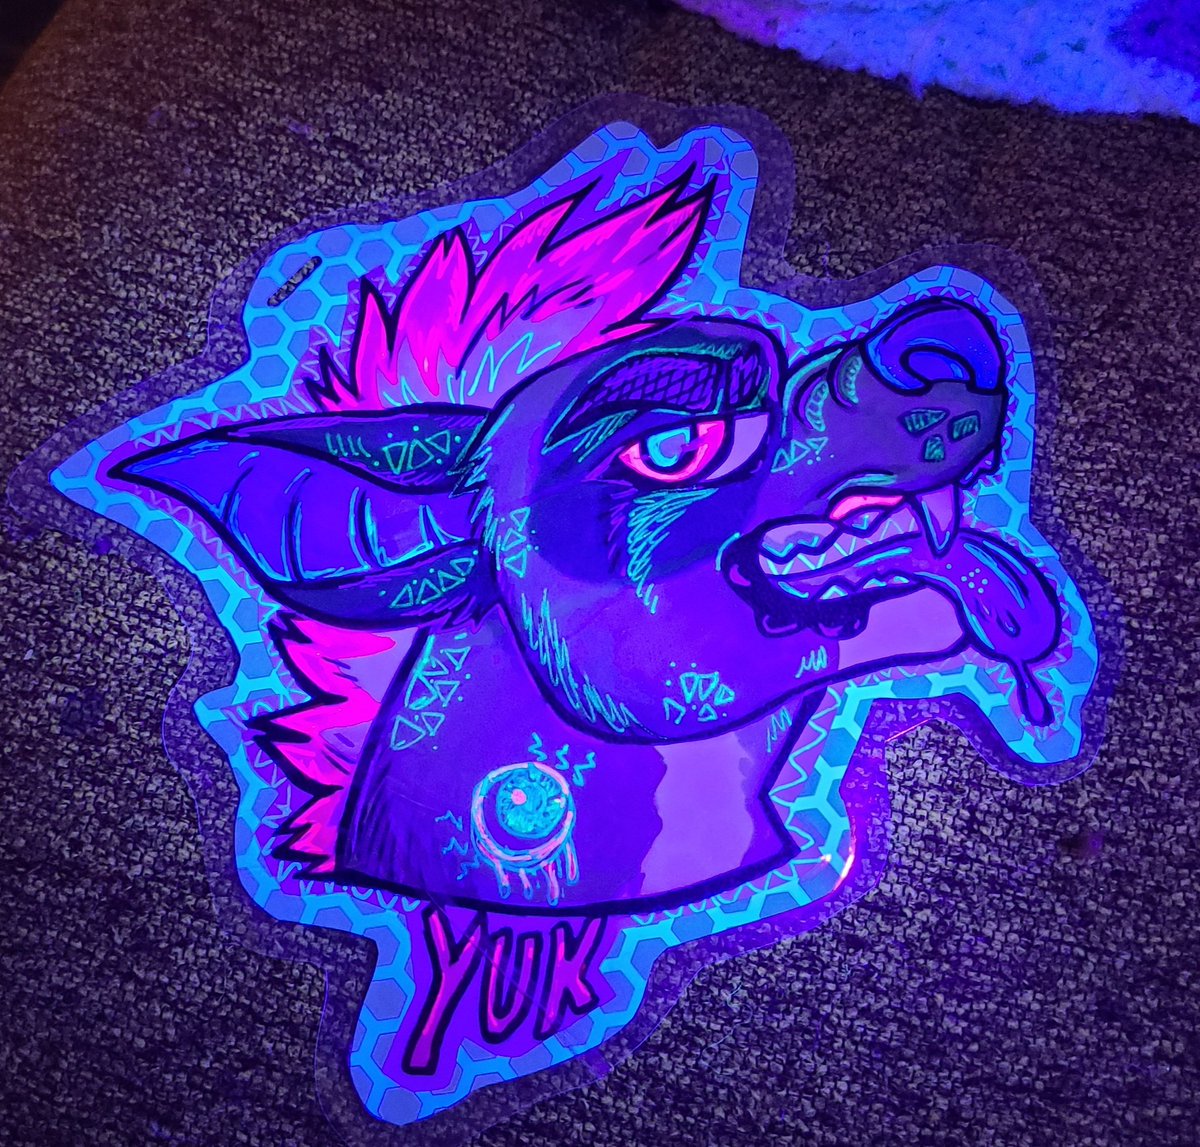 ✨️UV BADGE RAFFLE✨️

This raffle is for a custom UV reactive badge!! Shipping is free! 

Rules:
-rt+ like post
-follow me
-comment your fav snack